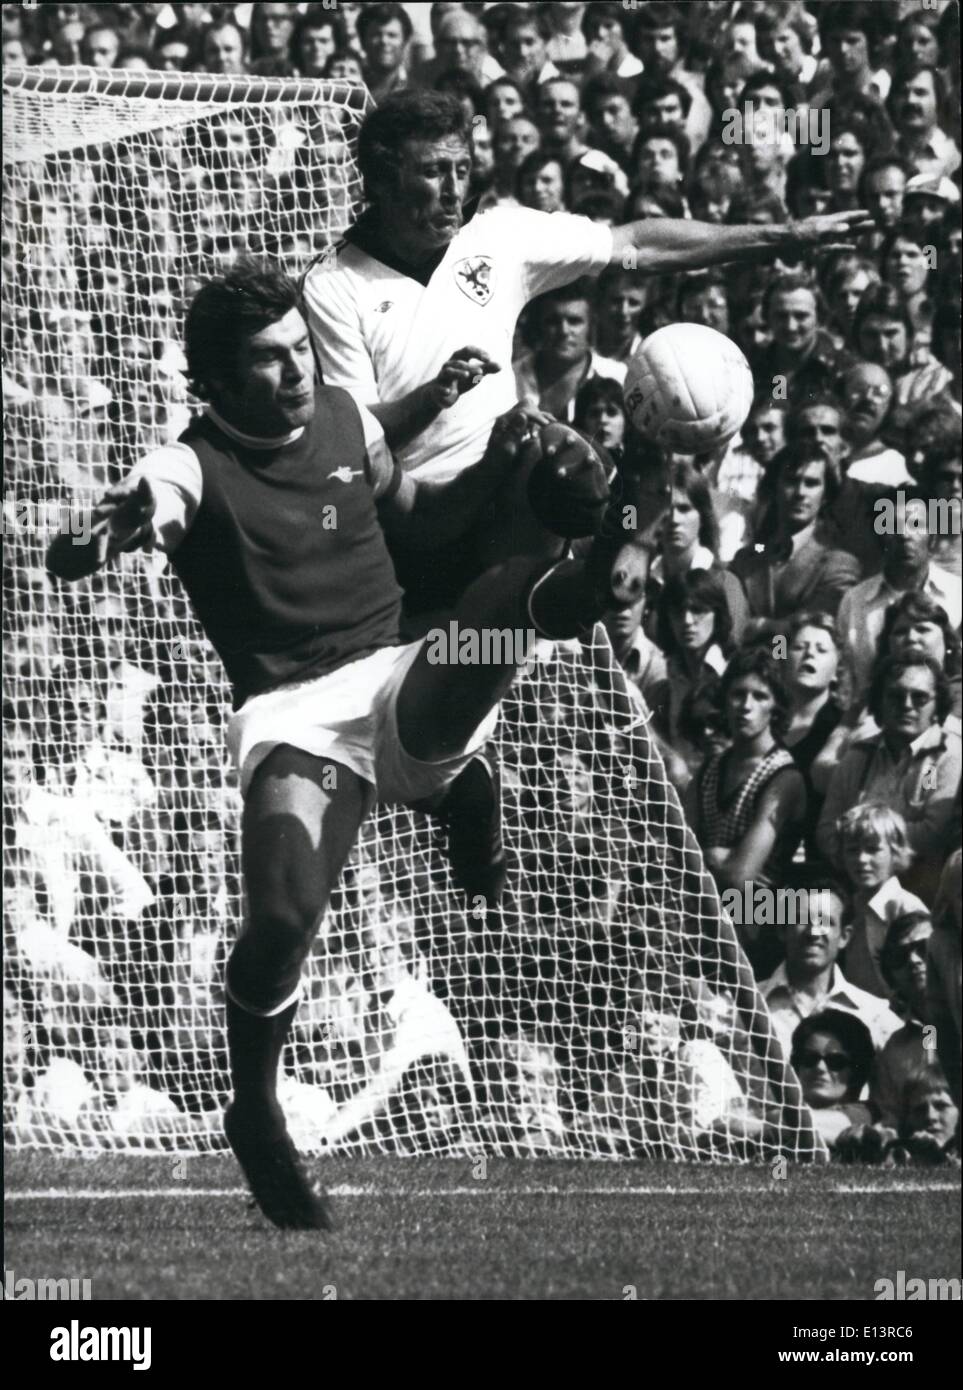 Mar. 27, 2012 - Toling It.: Malcolm MacDonald (Arsenal) reaches the ball with his toe 5 feet above the ground. In close attendance is Bristol City's Geoff Merrick. Stock Photo